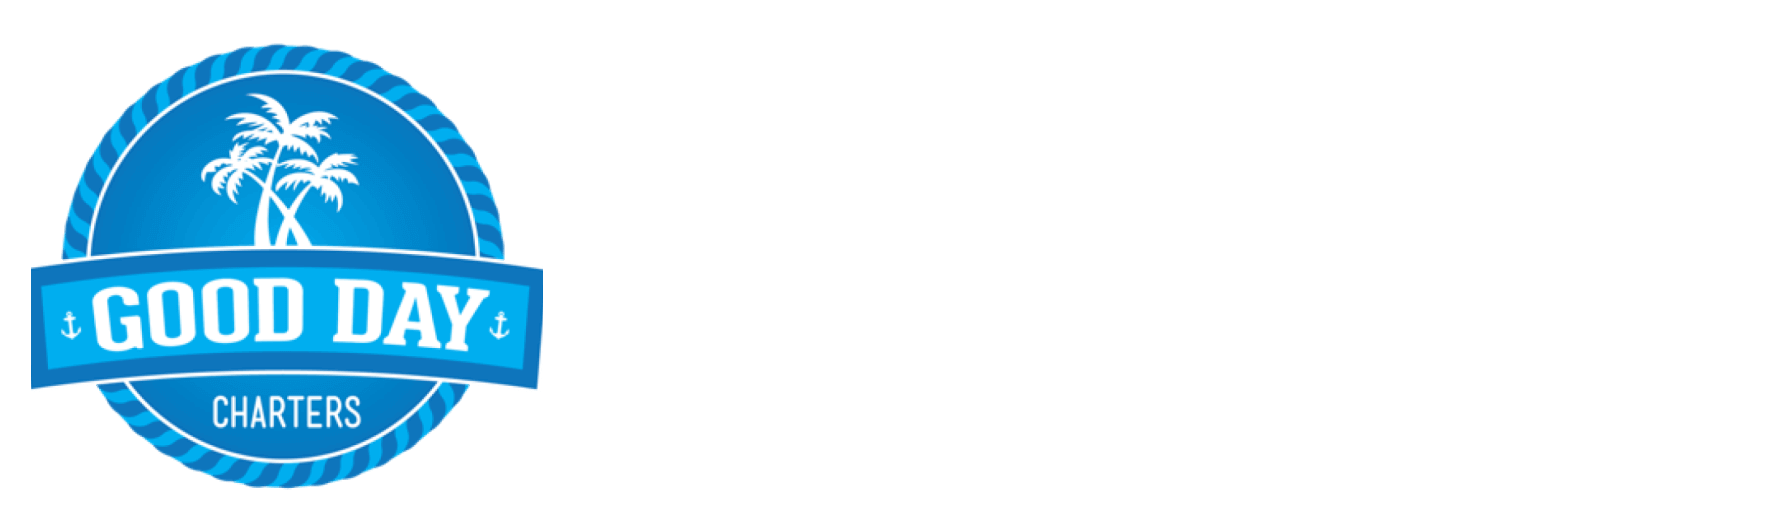 https://gooddaycharters.com/wp-content/uploads/2017/02/good-day-charters-logo3.png